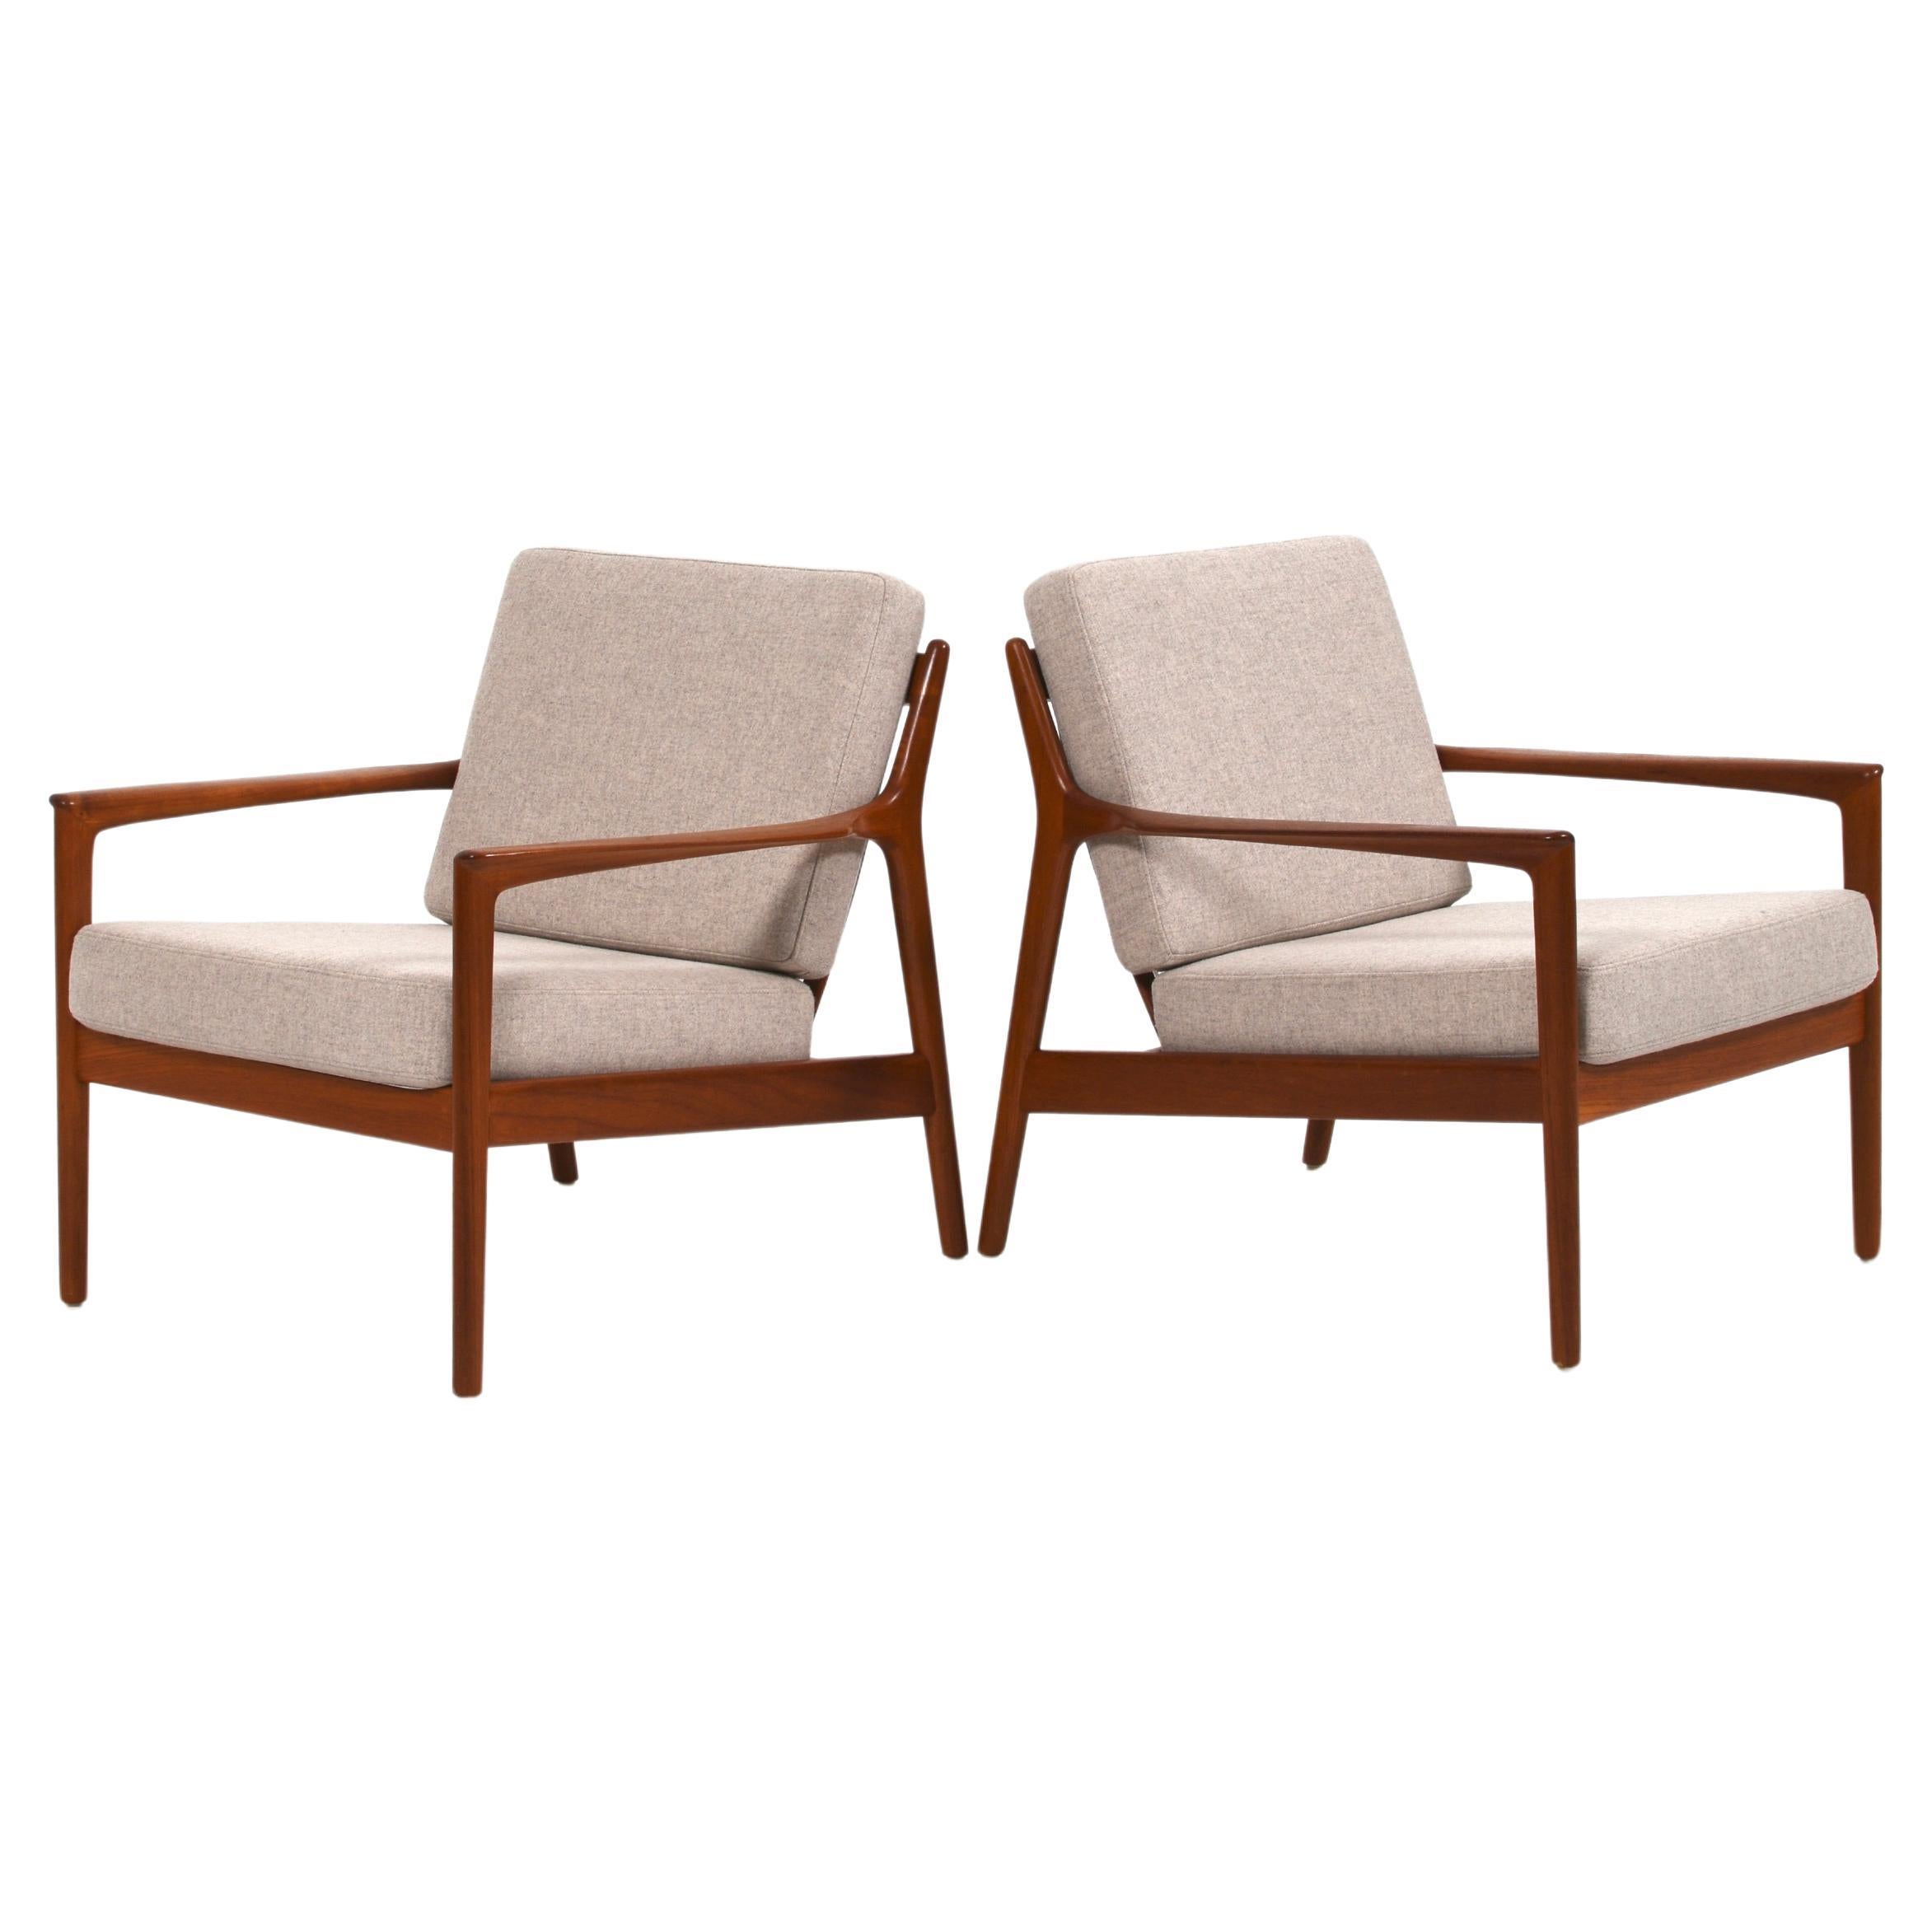 Pair of “USA 75” Teak Lounge Chairs by Folke Ohlsson for DUX, Sweden, 1960s For Sale